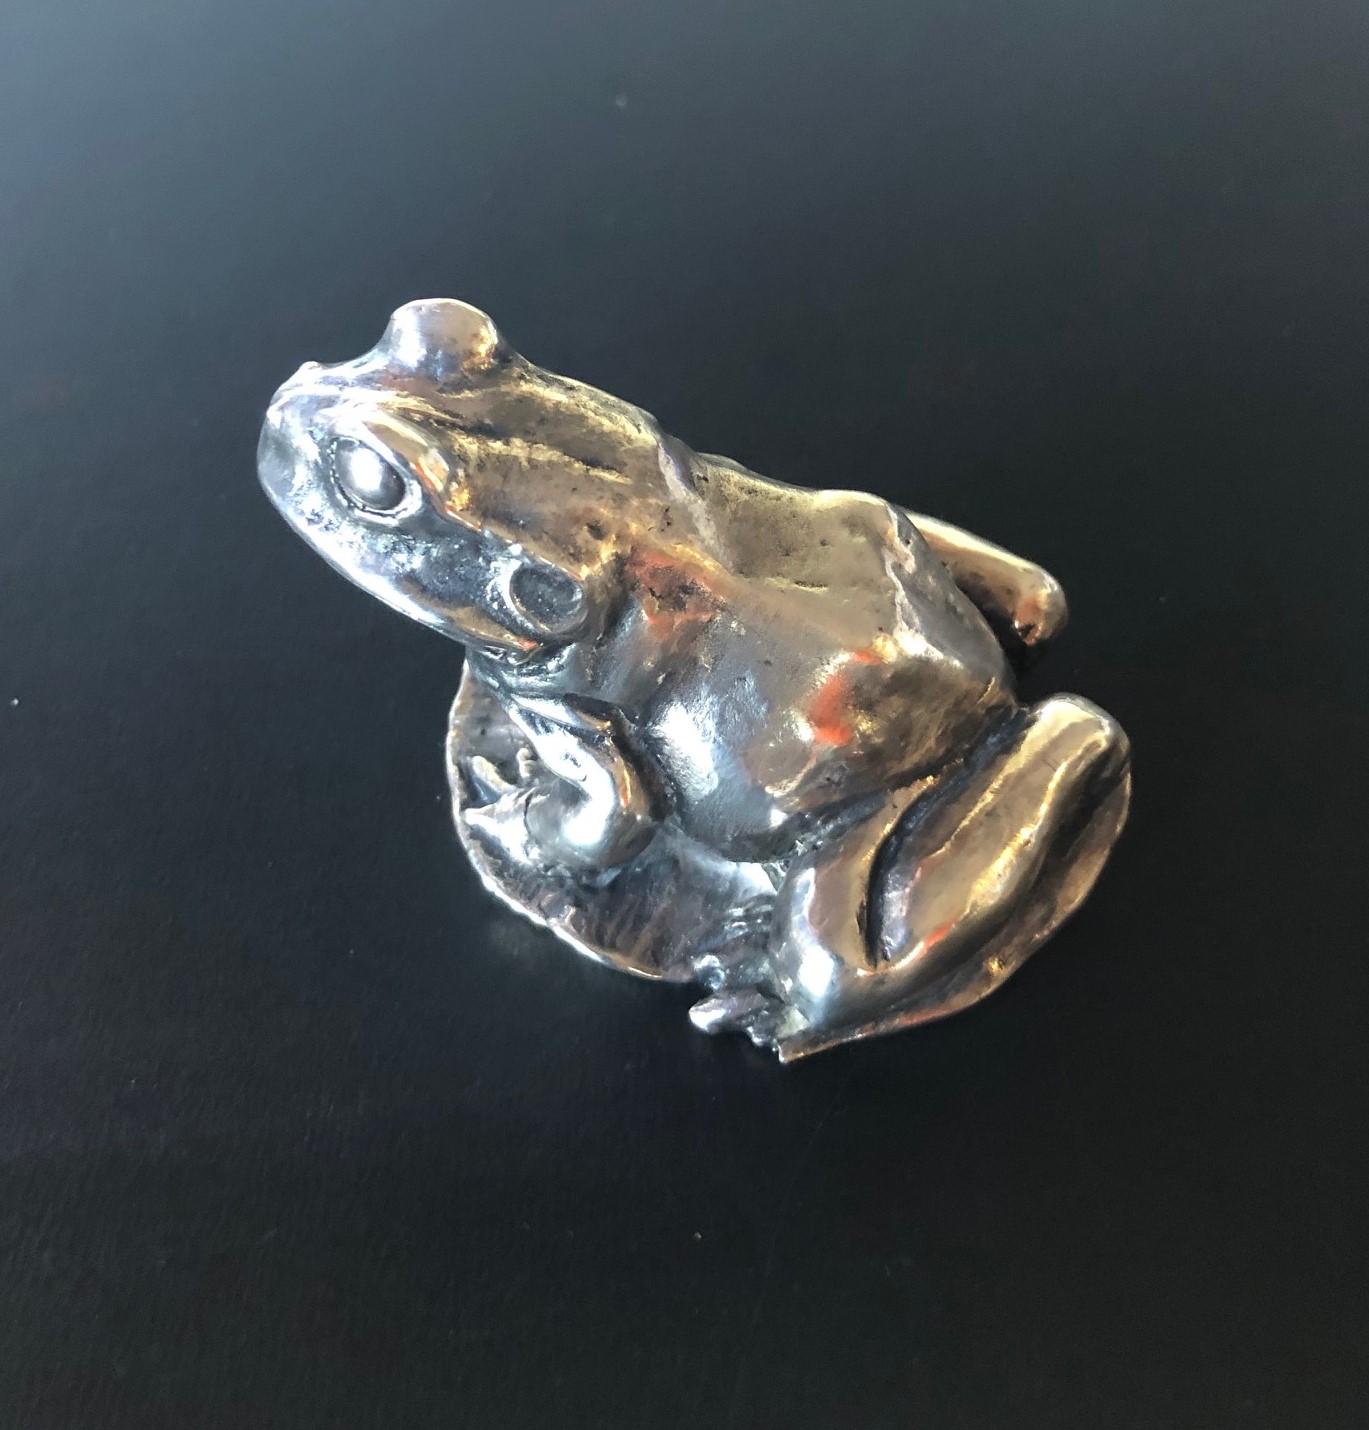 A very cool sterling silver frog / toad sculpture, circa 1970s. The frog is 3